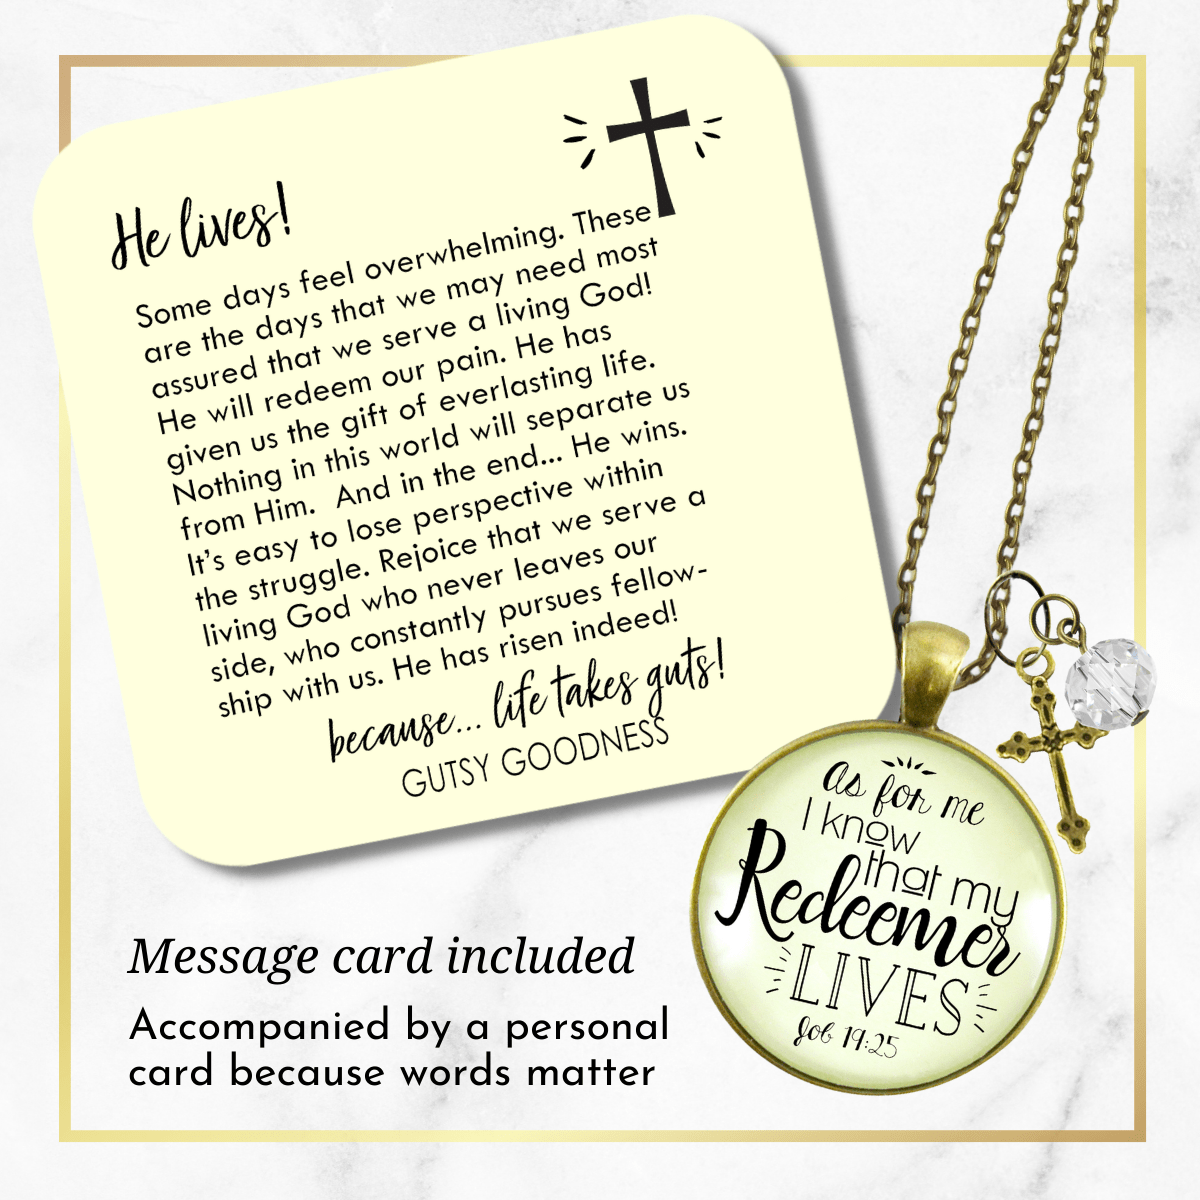 Gutsy Goodness I Know My Redeemer Lives Necklace Faith in Jesus Cross Womens Jewelry - Gutsy Goodness;I Know My Redeemer Lives Necklace Faith In Jesus Cross Womens Jewelry - Gutsy Goodness Handmade Jewelry Gifts